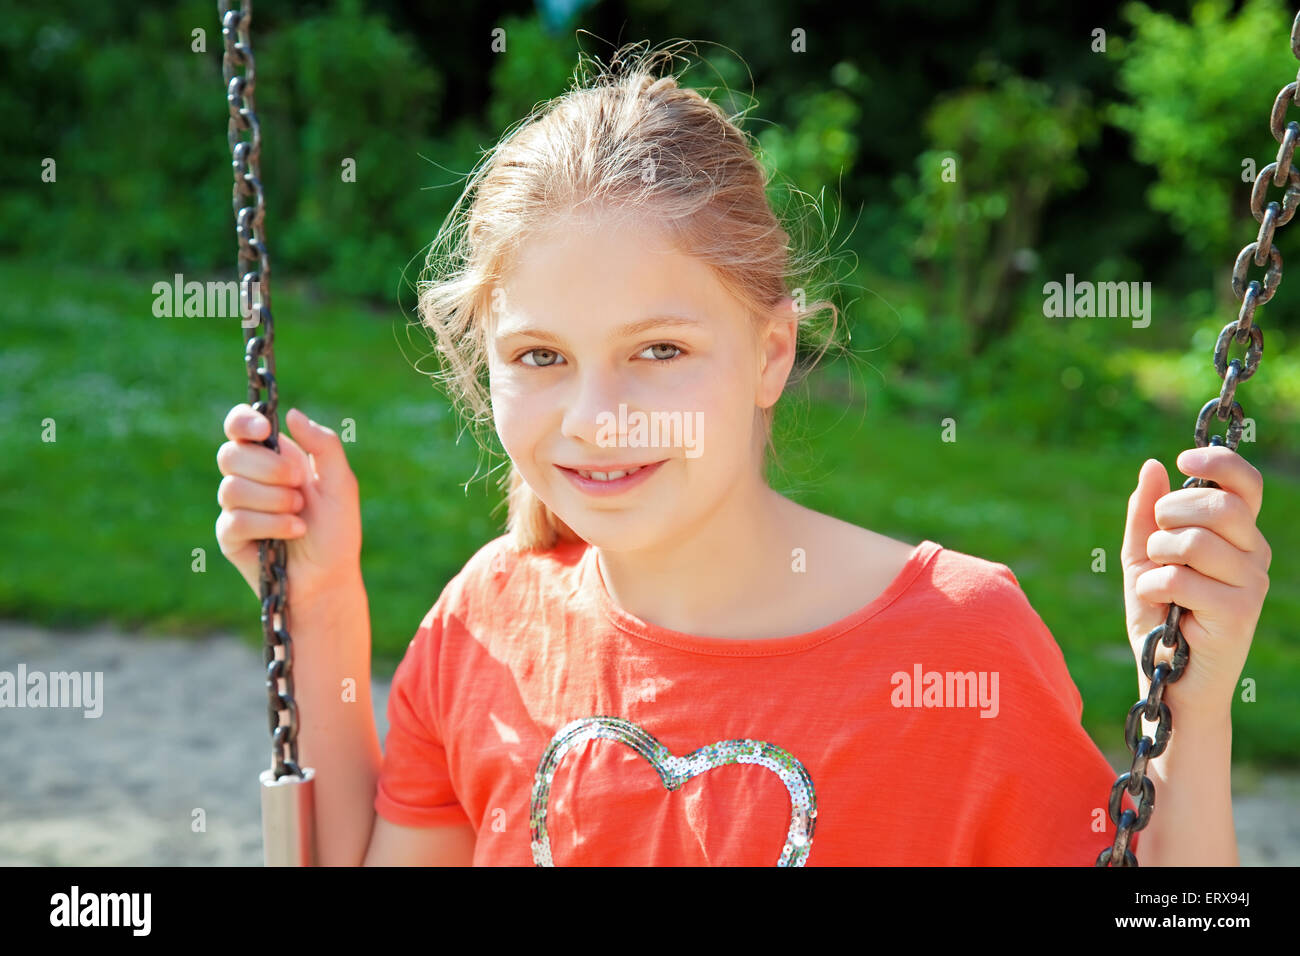 happy young girl on a swing Stock Photo